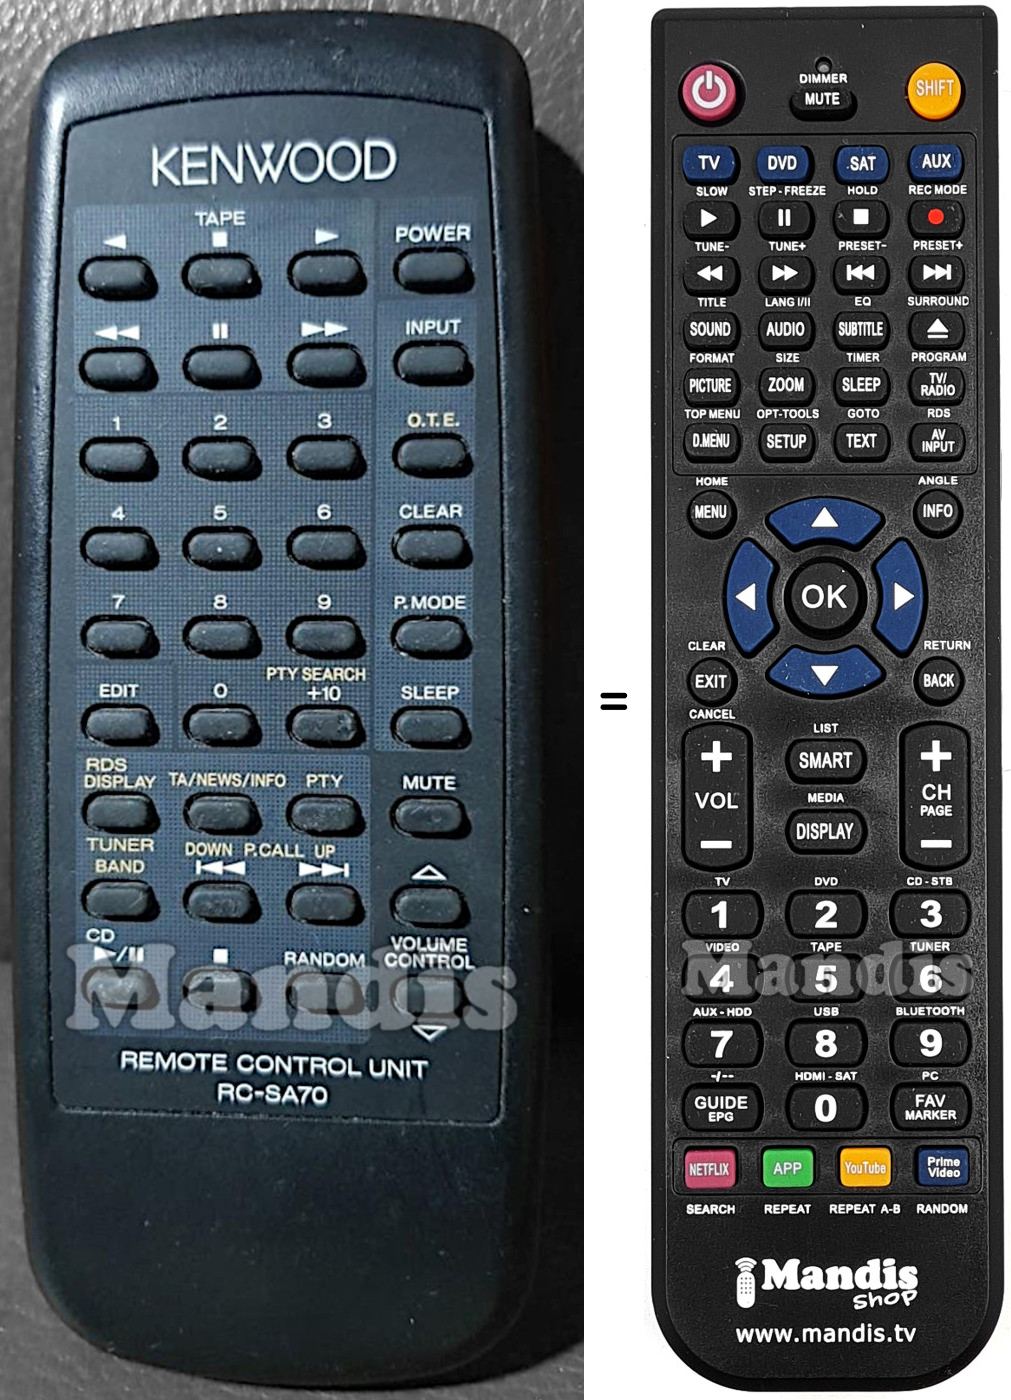 Replacement remote control RC-SA70